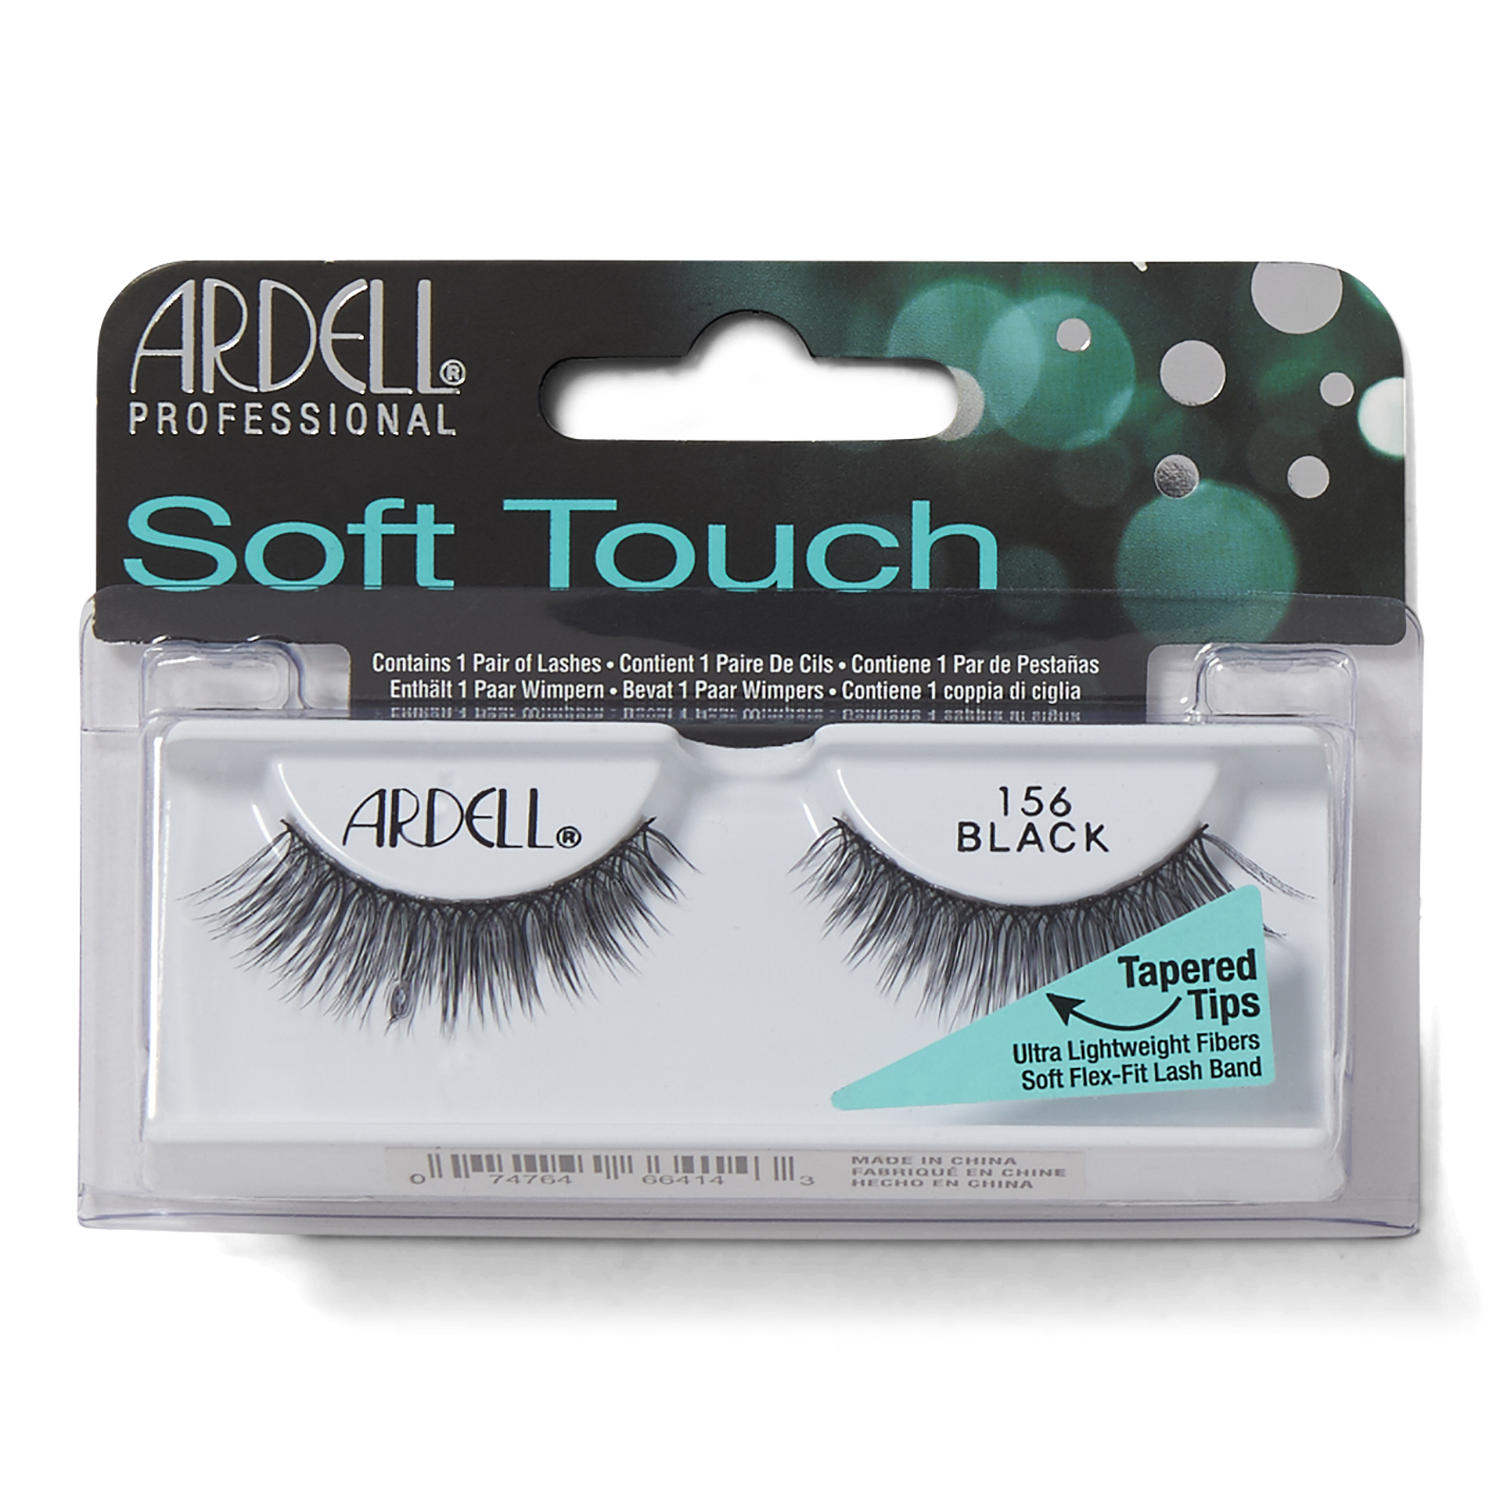 Soft Touch #156 Lashes